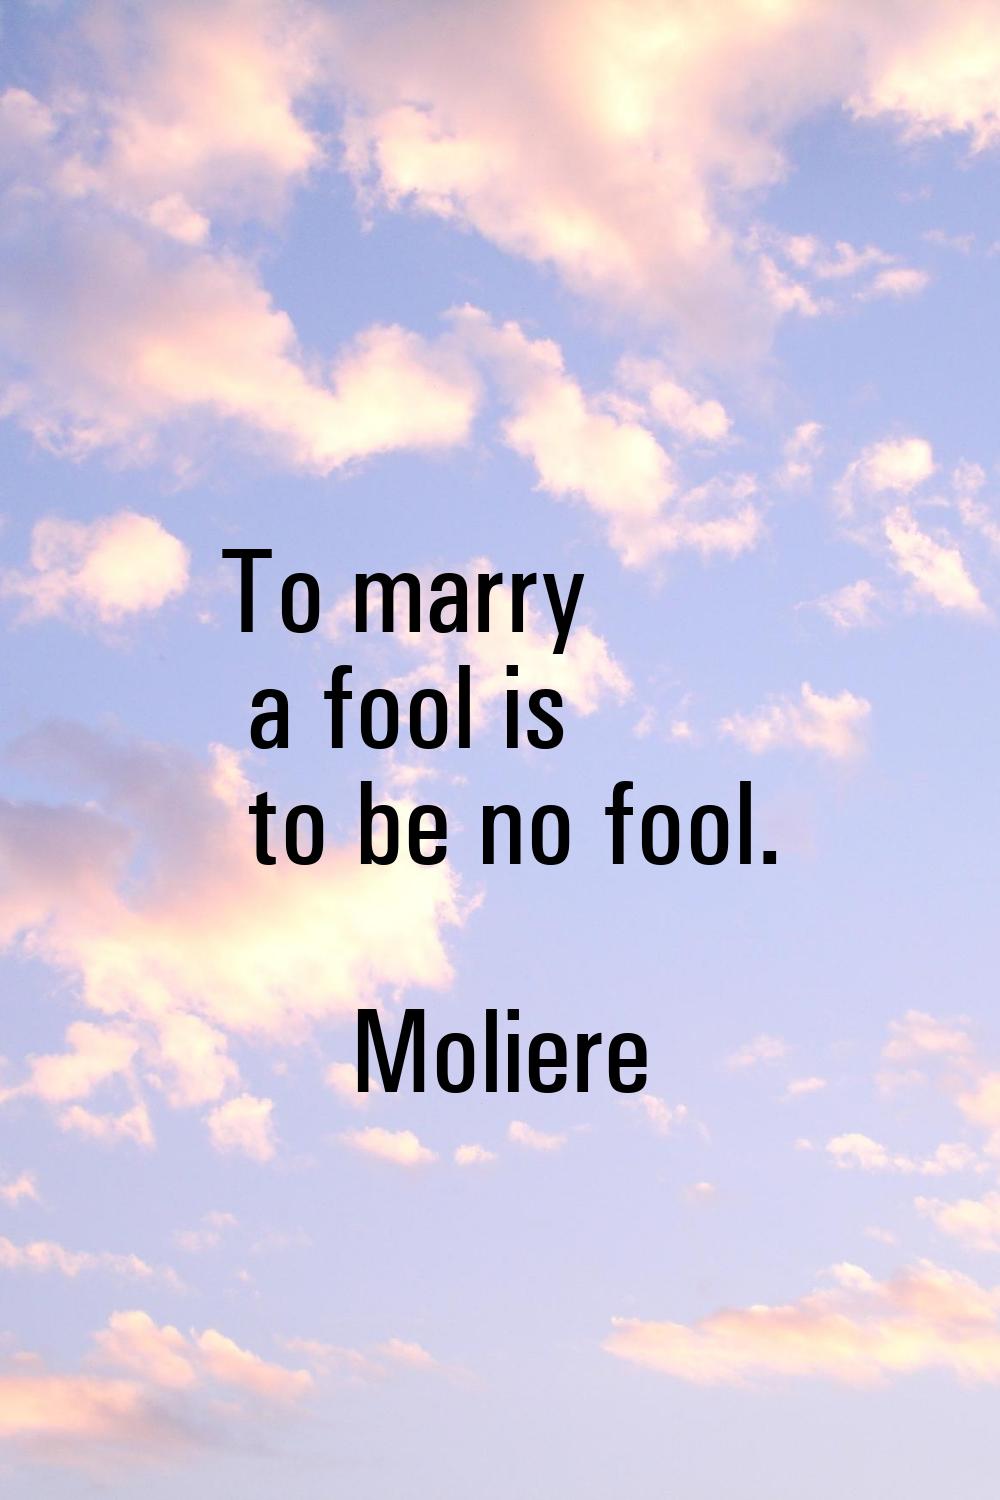 To marry a fool is to be no fool.